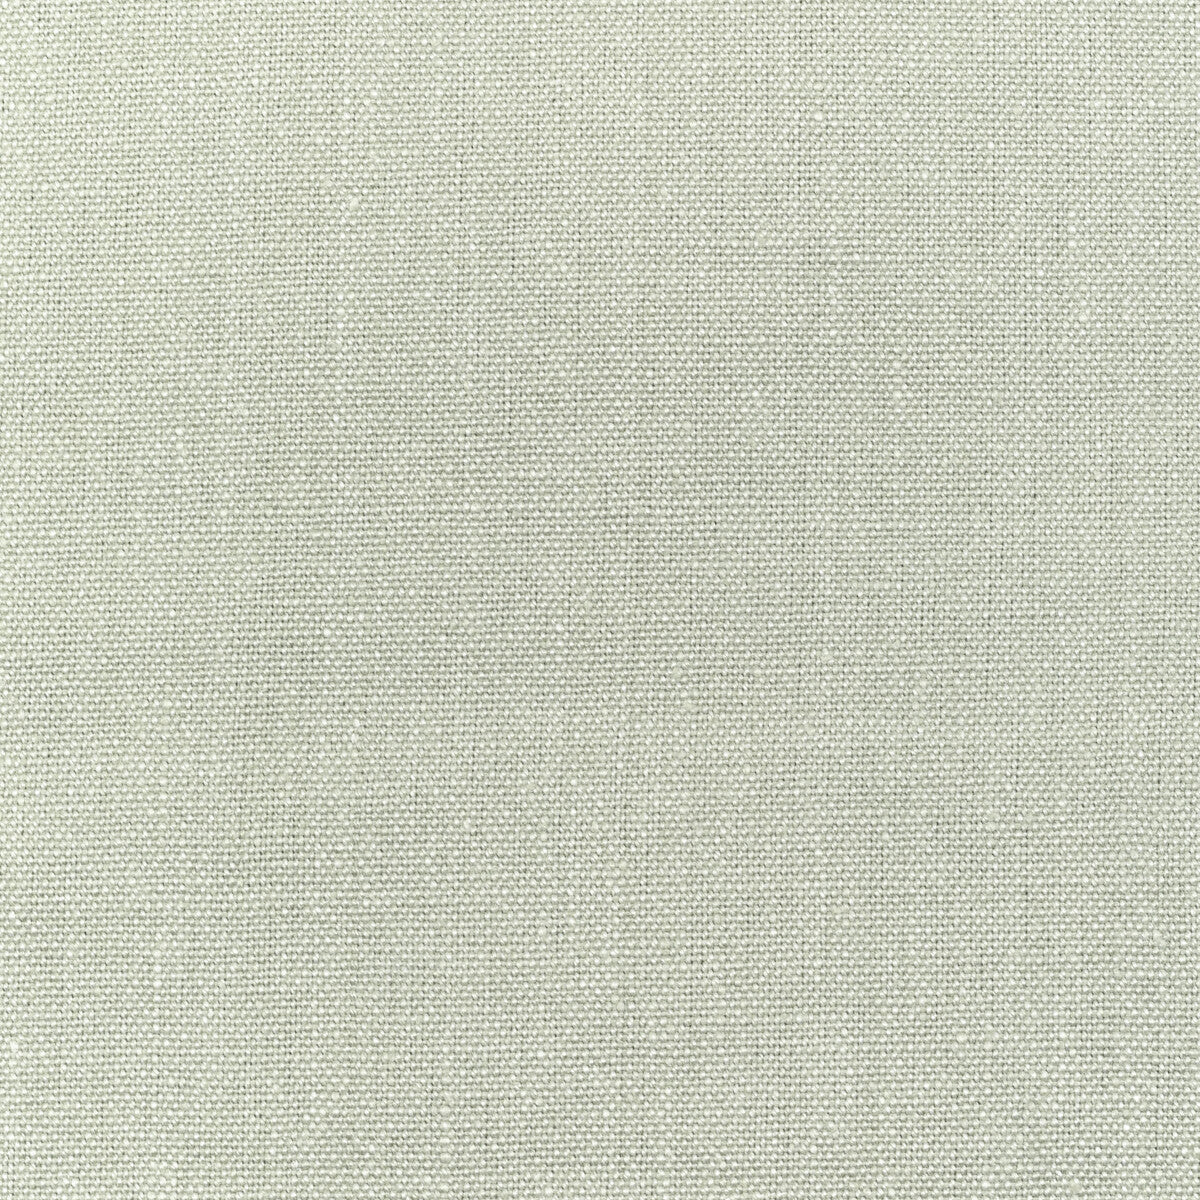 Knightsbridge fabric in pale aqua color - pattern PF50199.715.0 - by Baker Lifestyle in the Perfect Plains collection